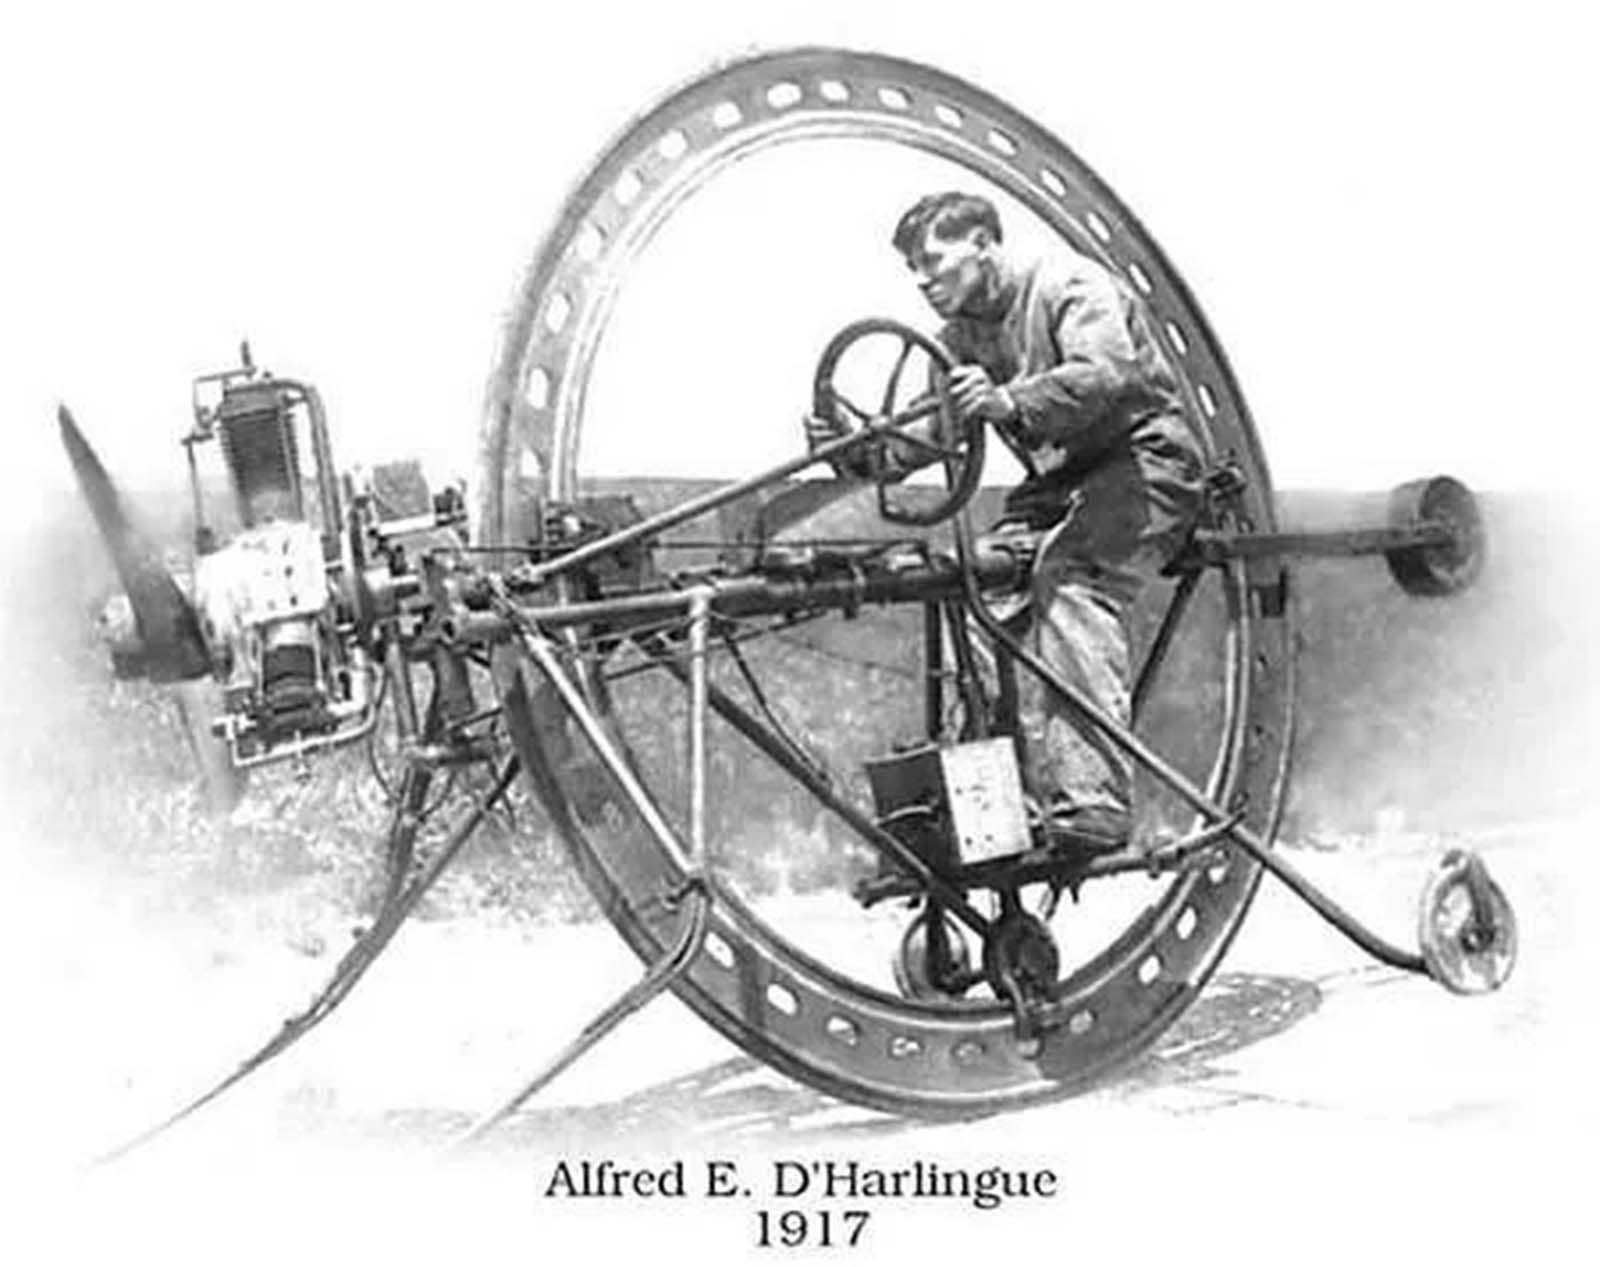 The D’Harlingue Monowheel with its inventor in 1917.